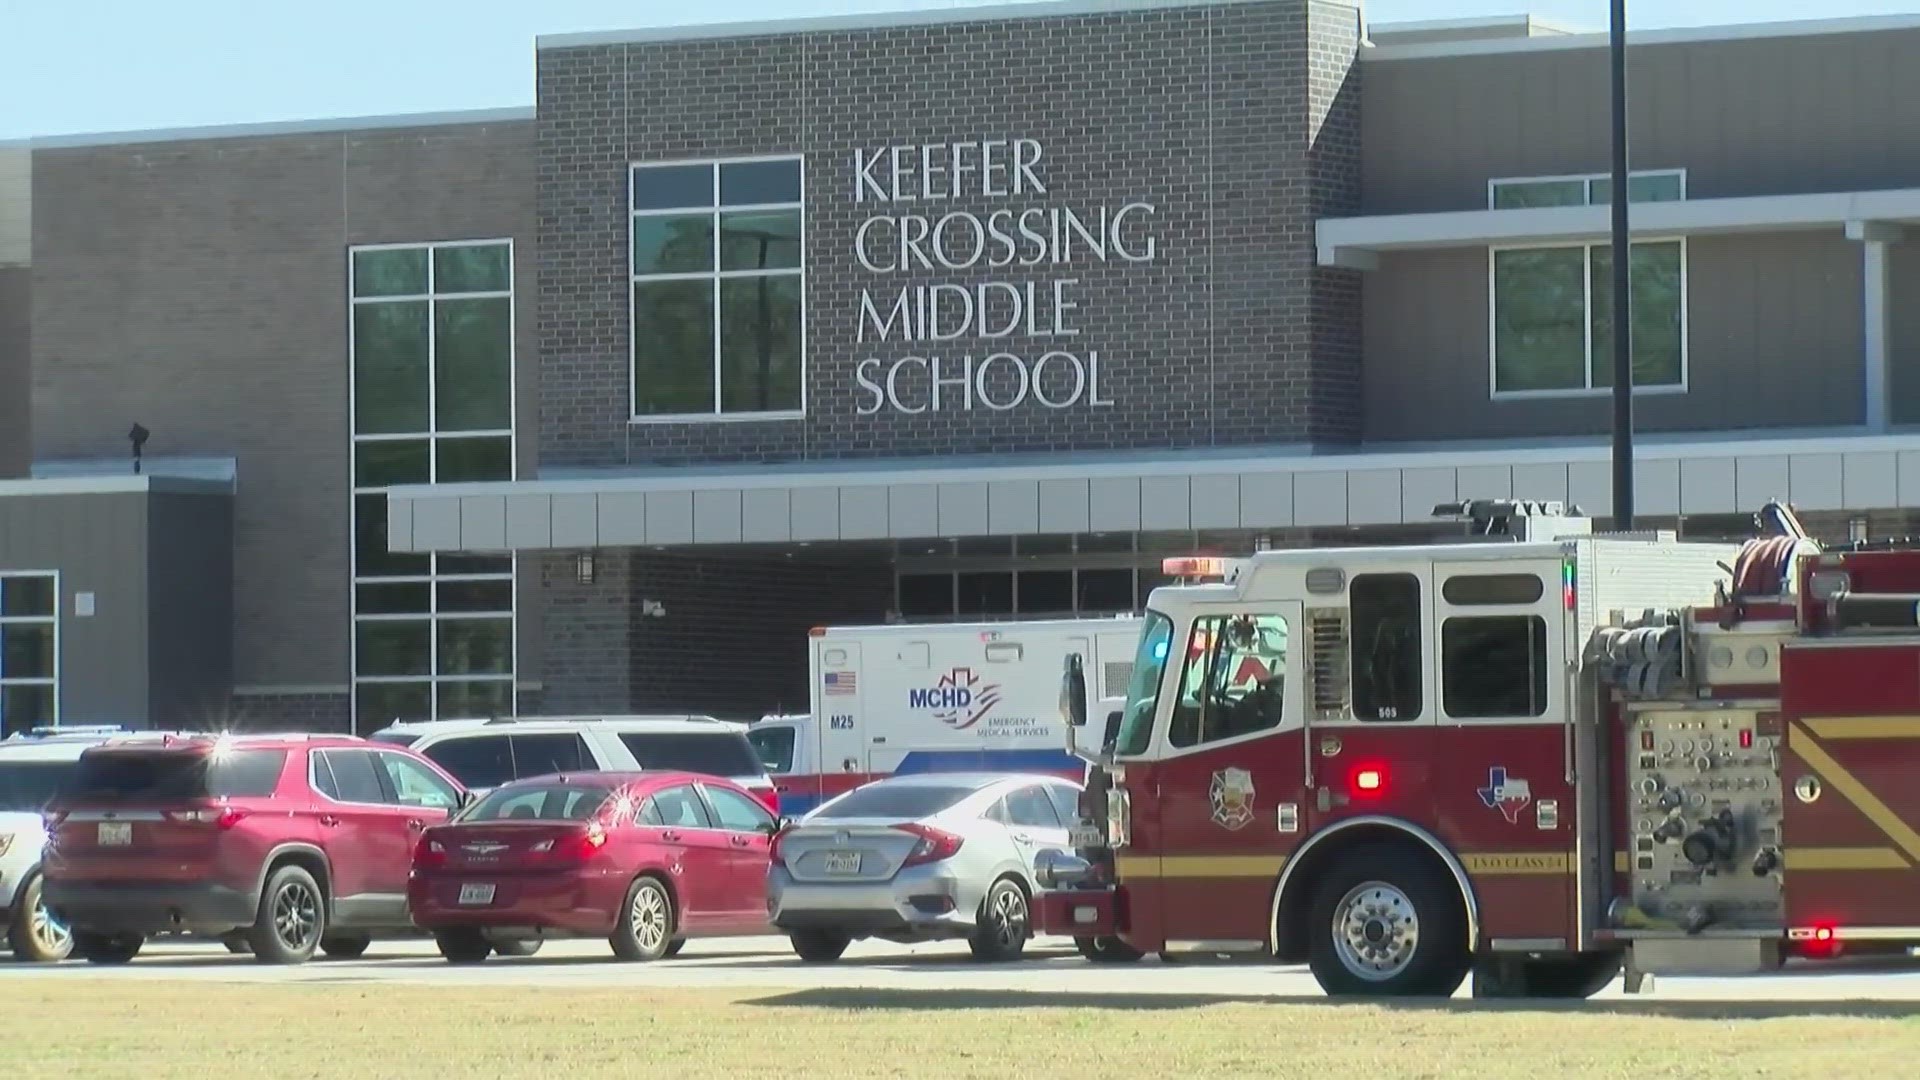 Seven students from Keefer Crossing Middle School were taken to the hospital Tuesday, Feb. 13 after eating gummies laced with THC, New Caney ISD said.